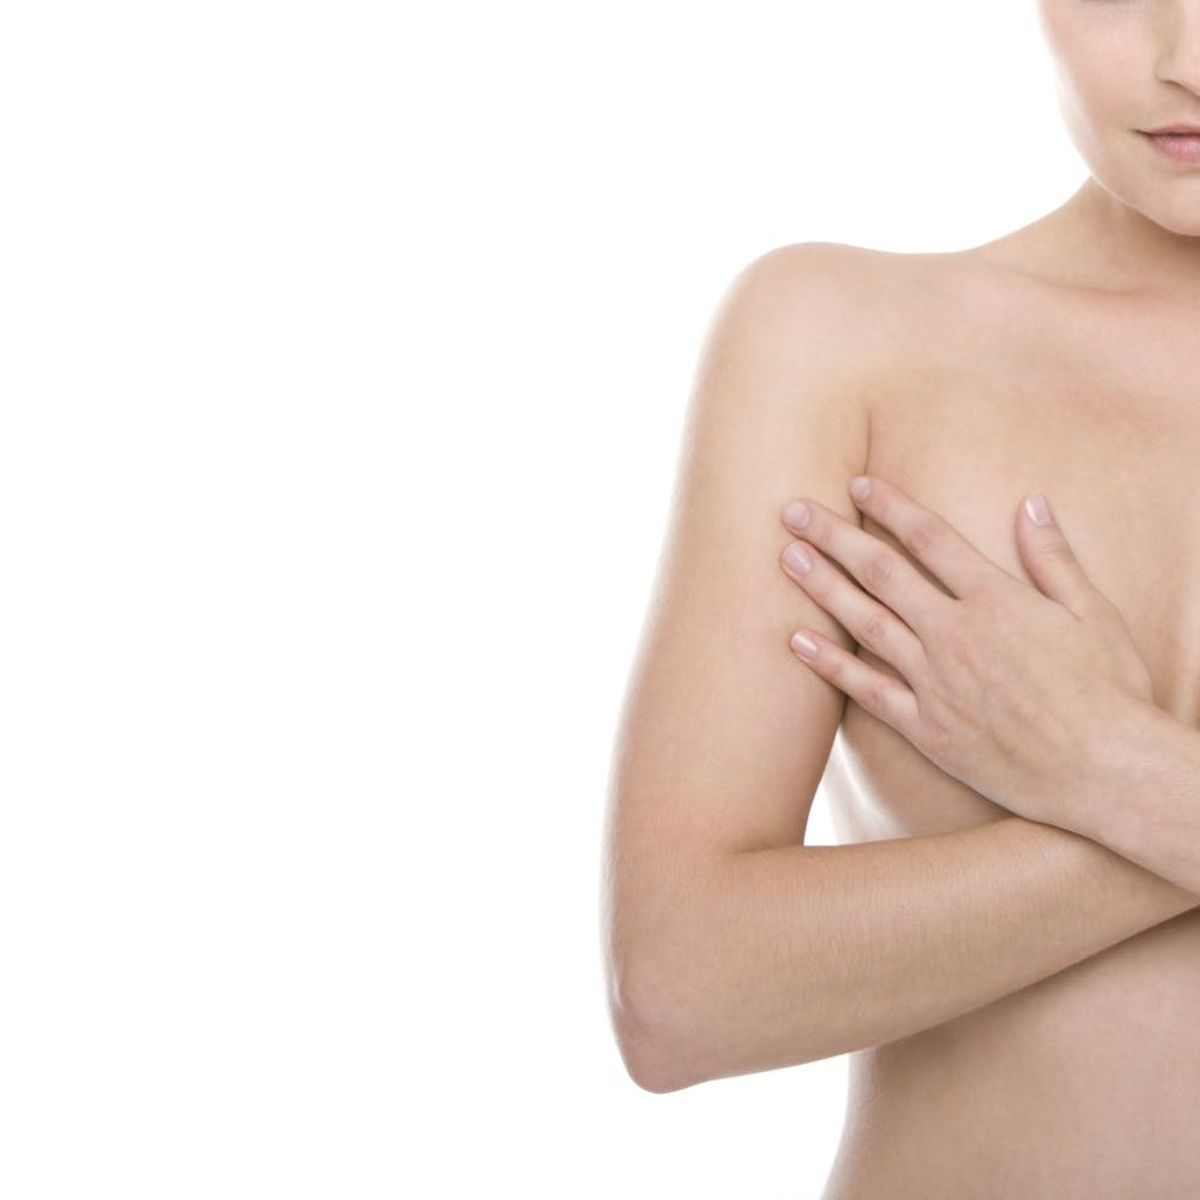 Why Women of All Ages Should Do a Monthly Breast Self-Exam